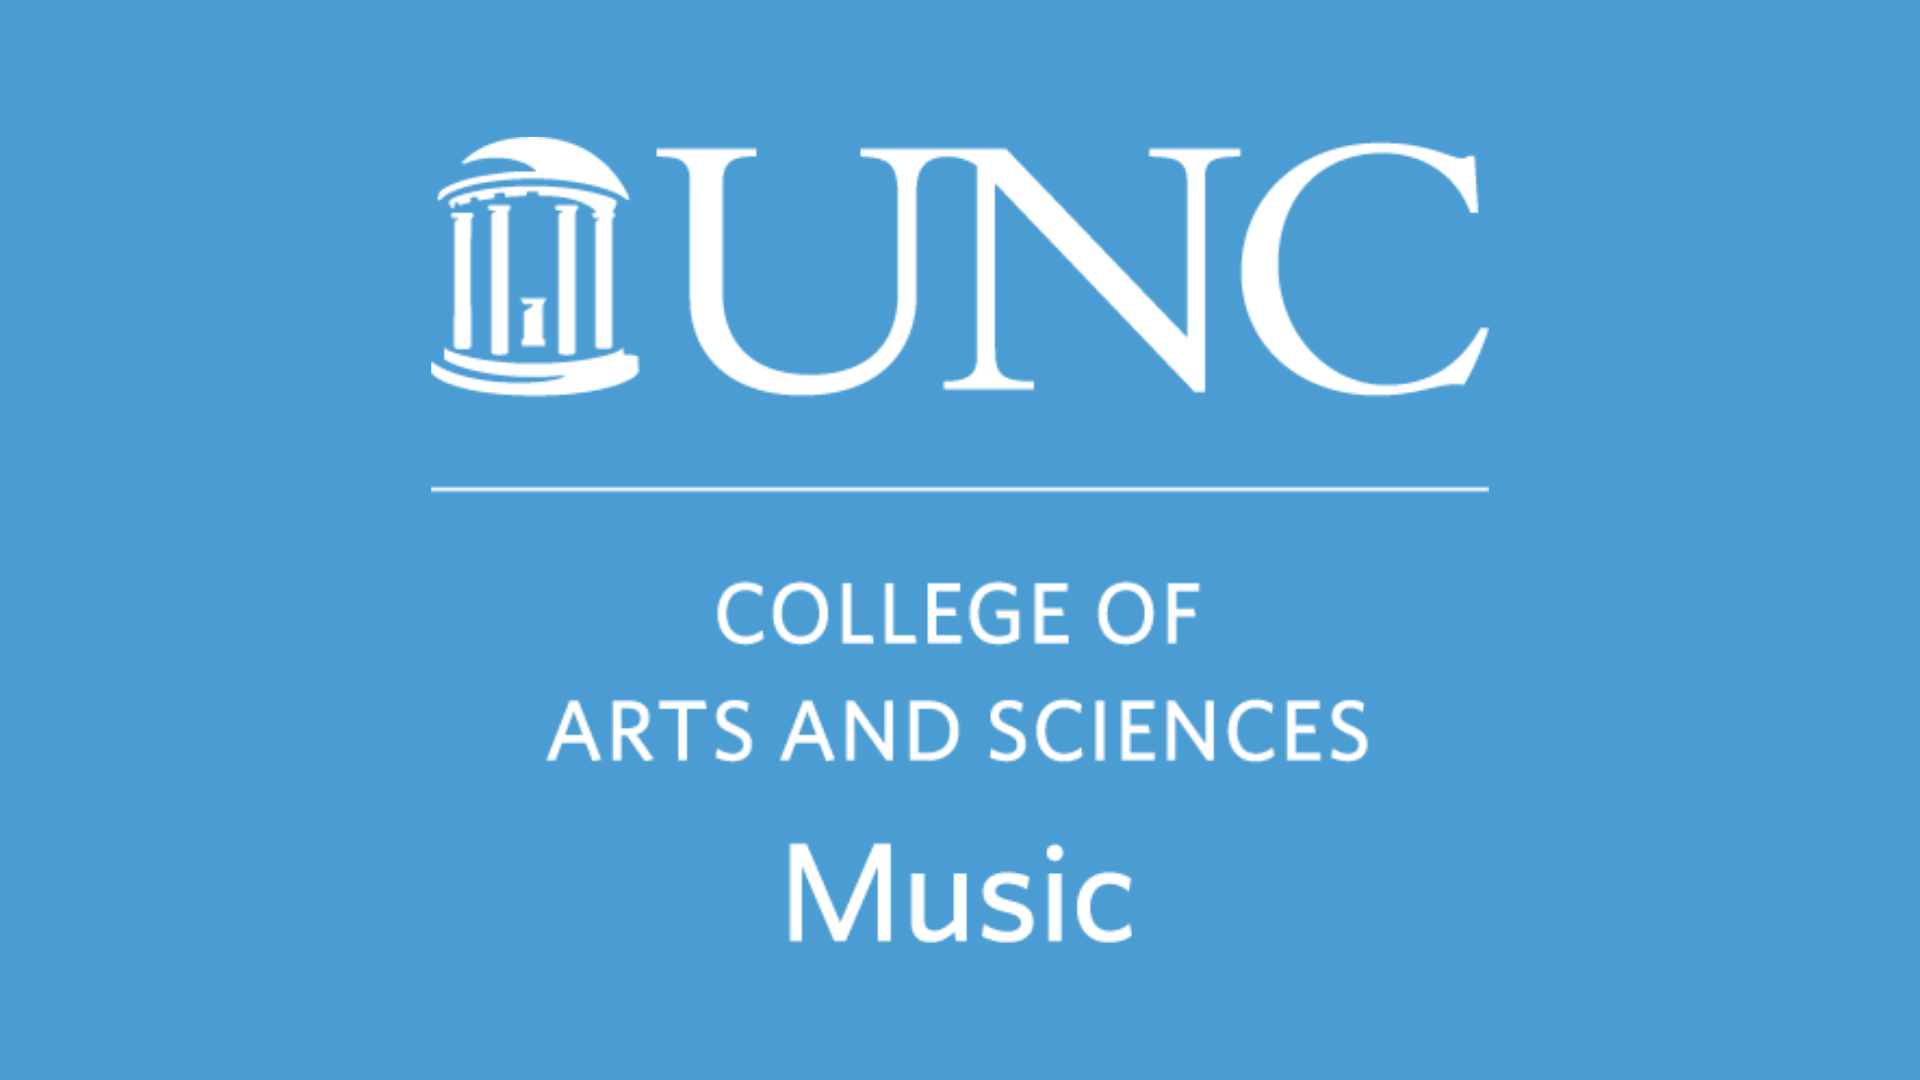 Carolina blue graphic with white UNC old well logo. Underneath, text reads "College of Arts and Sciences // Music"